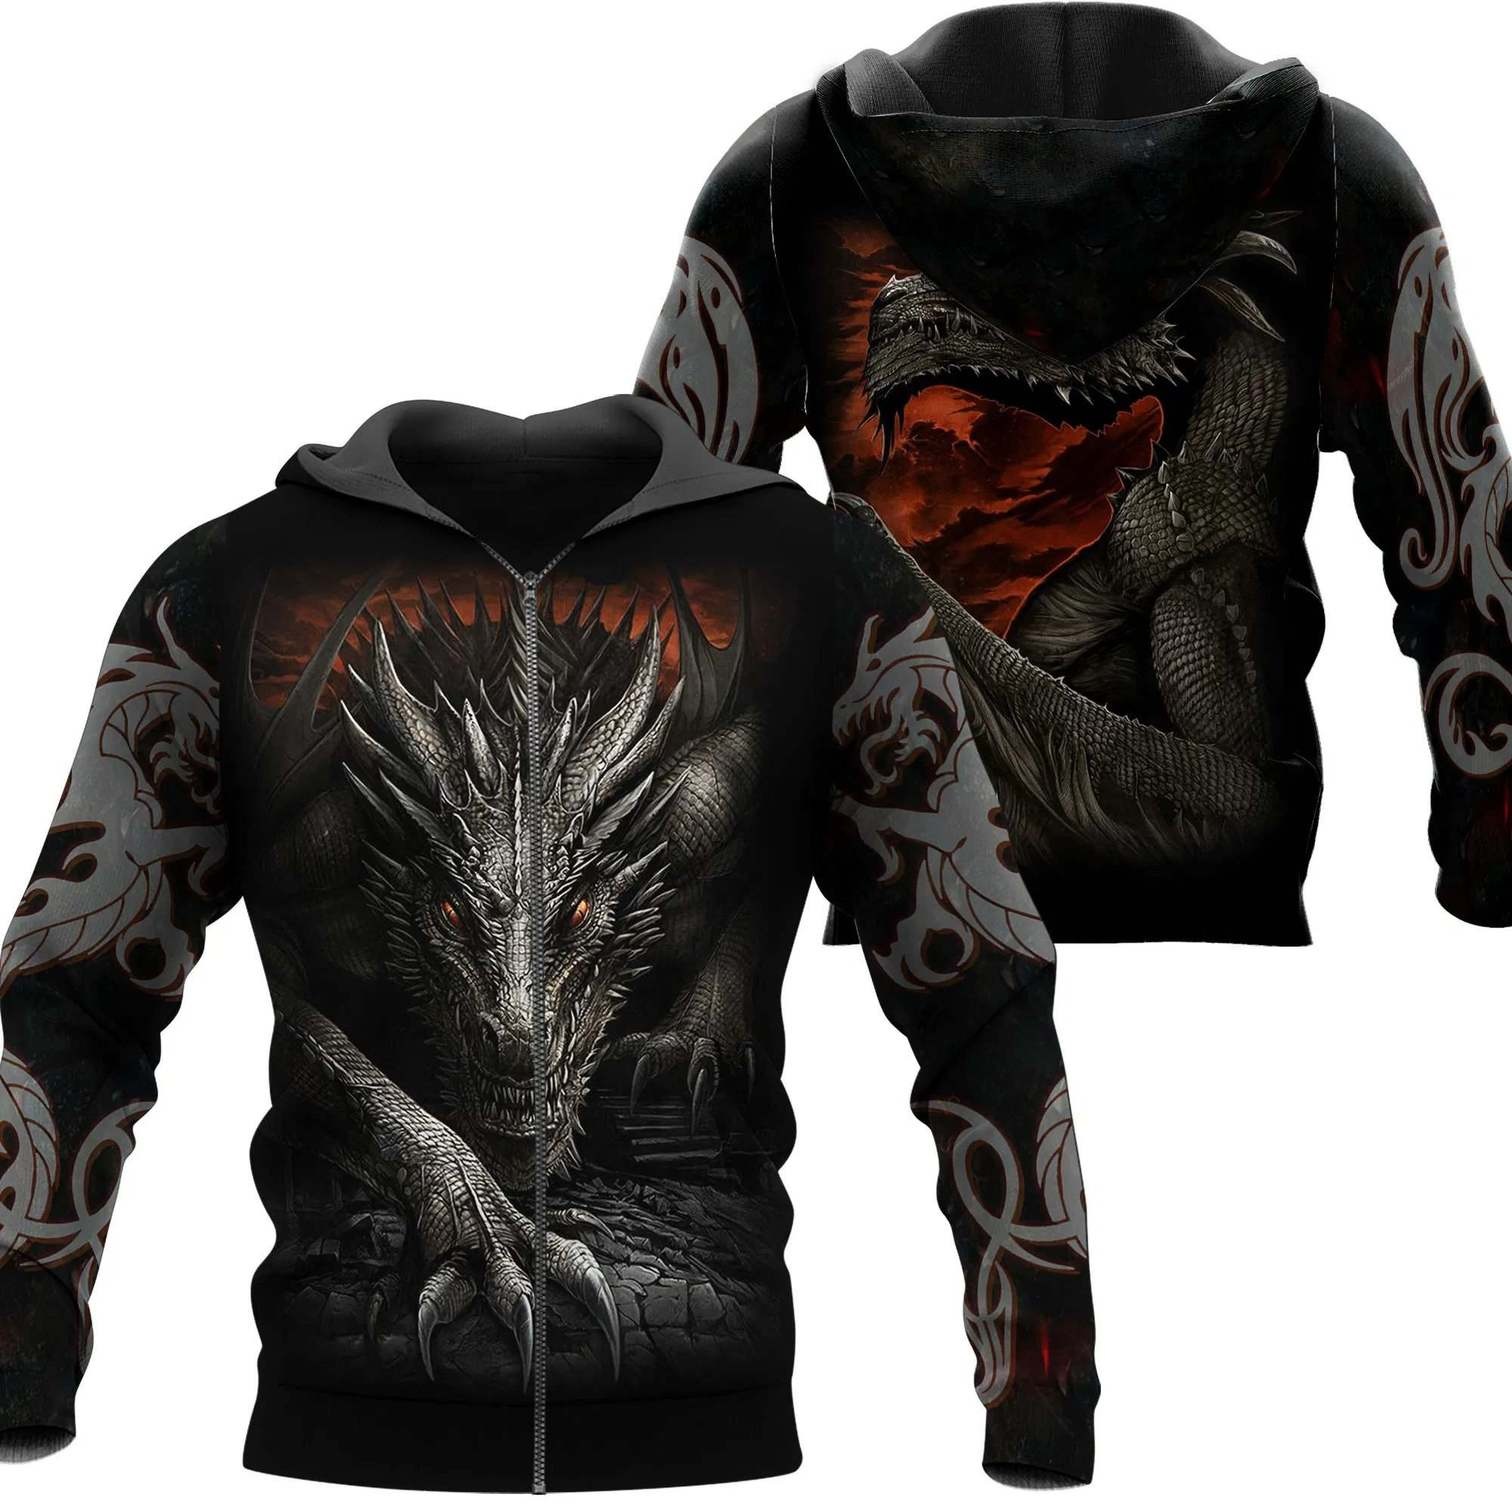 Dragon armor all over printed zip hoodie